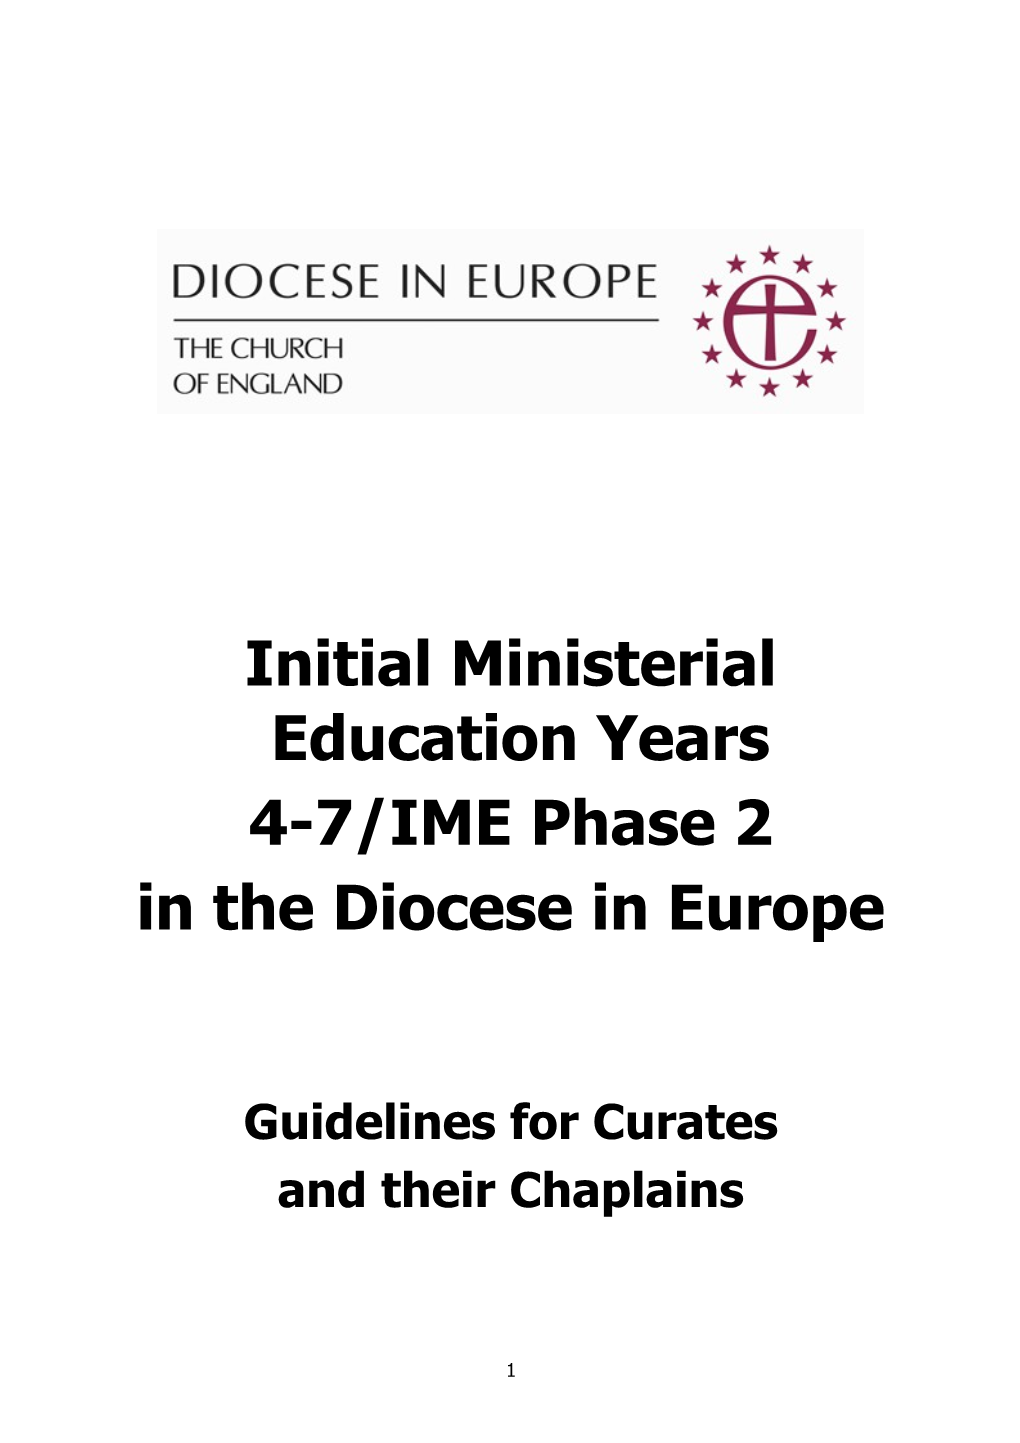 Initial Ministerial Education Years